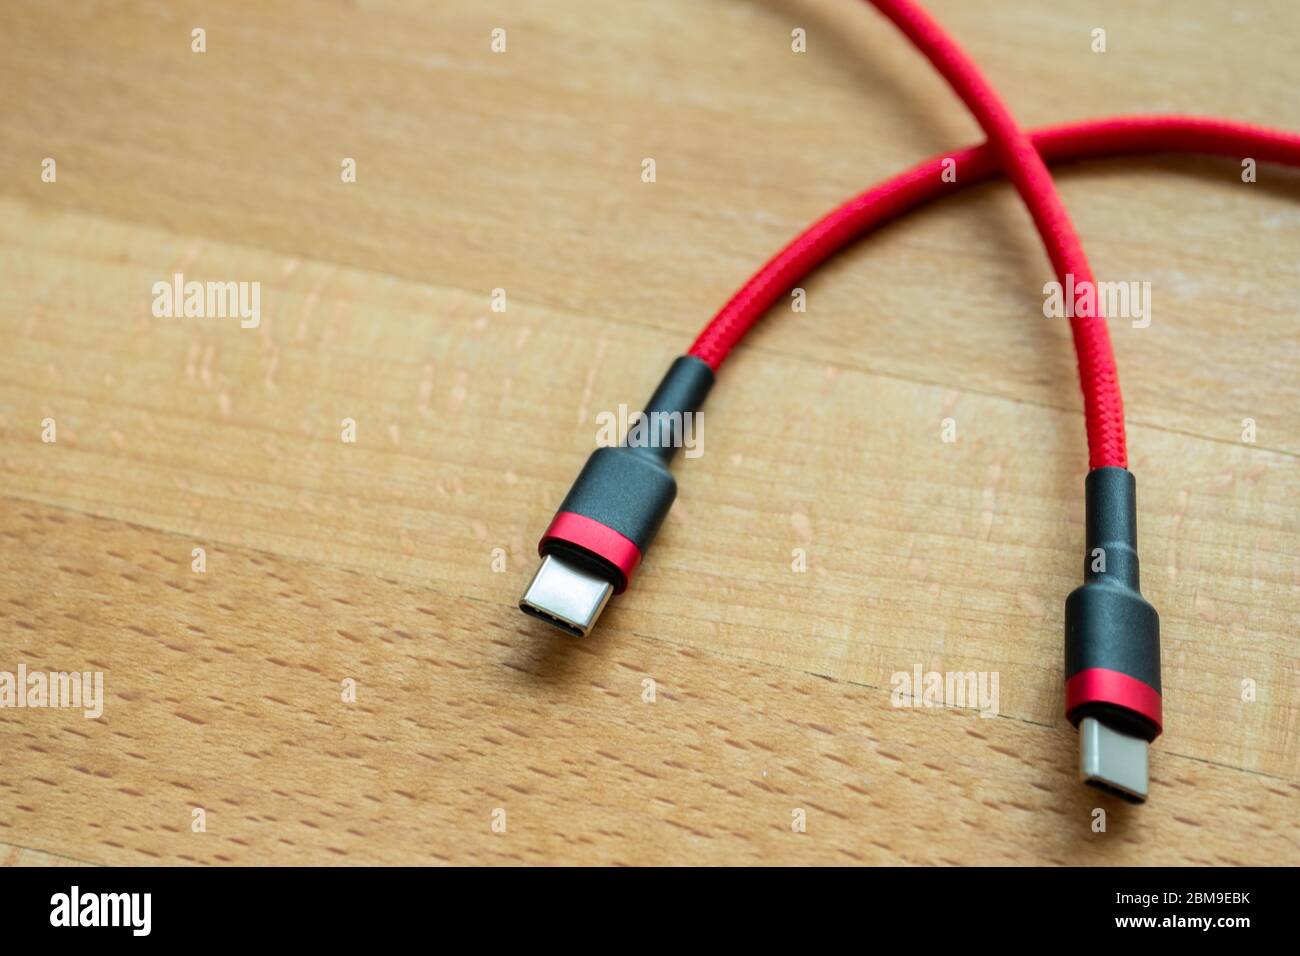 The USB type c is a hi speed data transfer and quick or fast charge battery.It a new connector port of a computer , laptop, or cell phone.A red cable Stock Photo